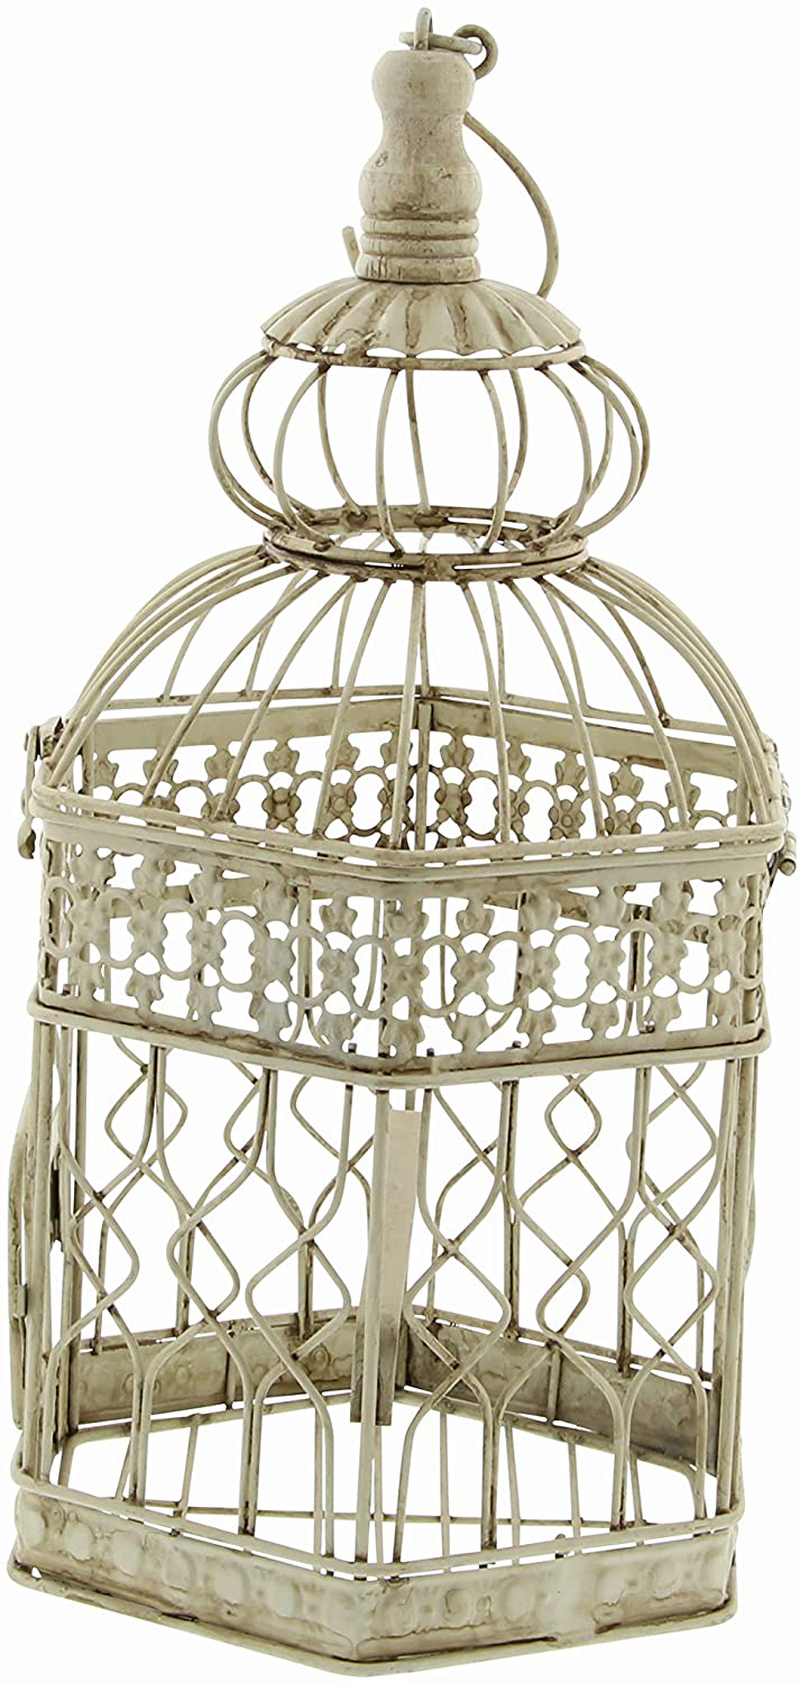 Deco 79 Metal Bird Cage, 21-Inch and 18-Inch, Set of 2 – KOL PET